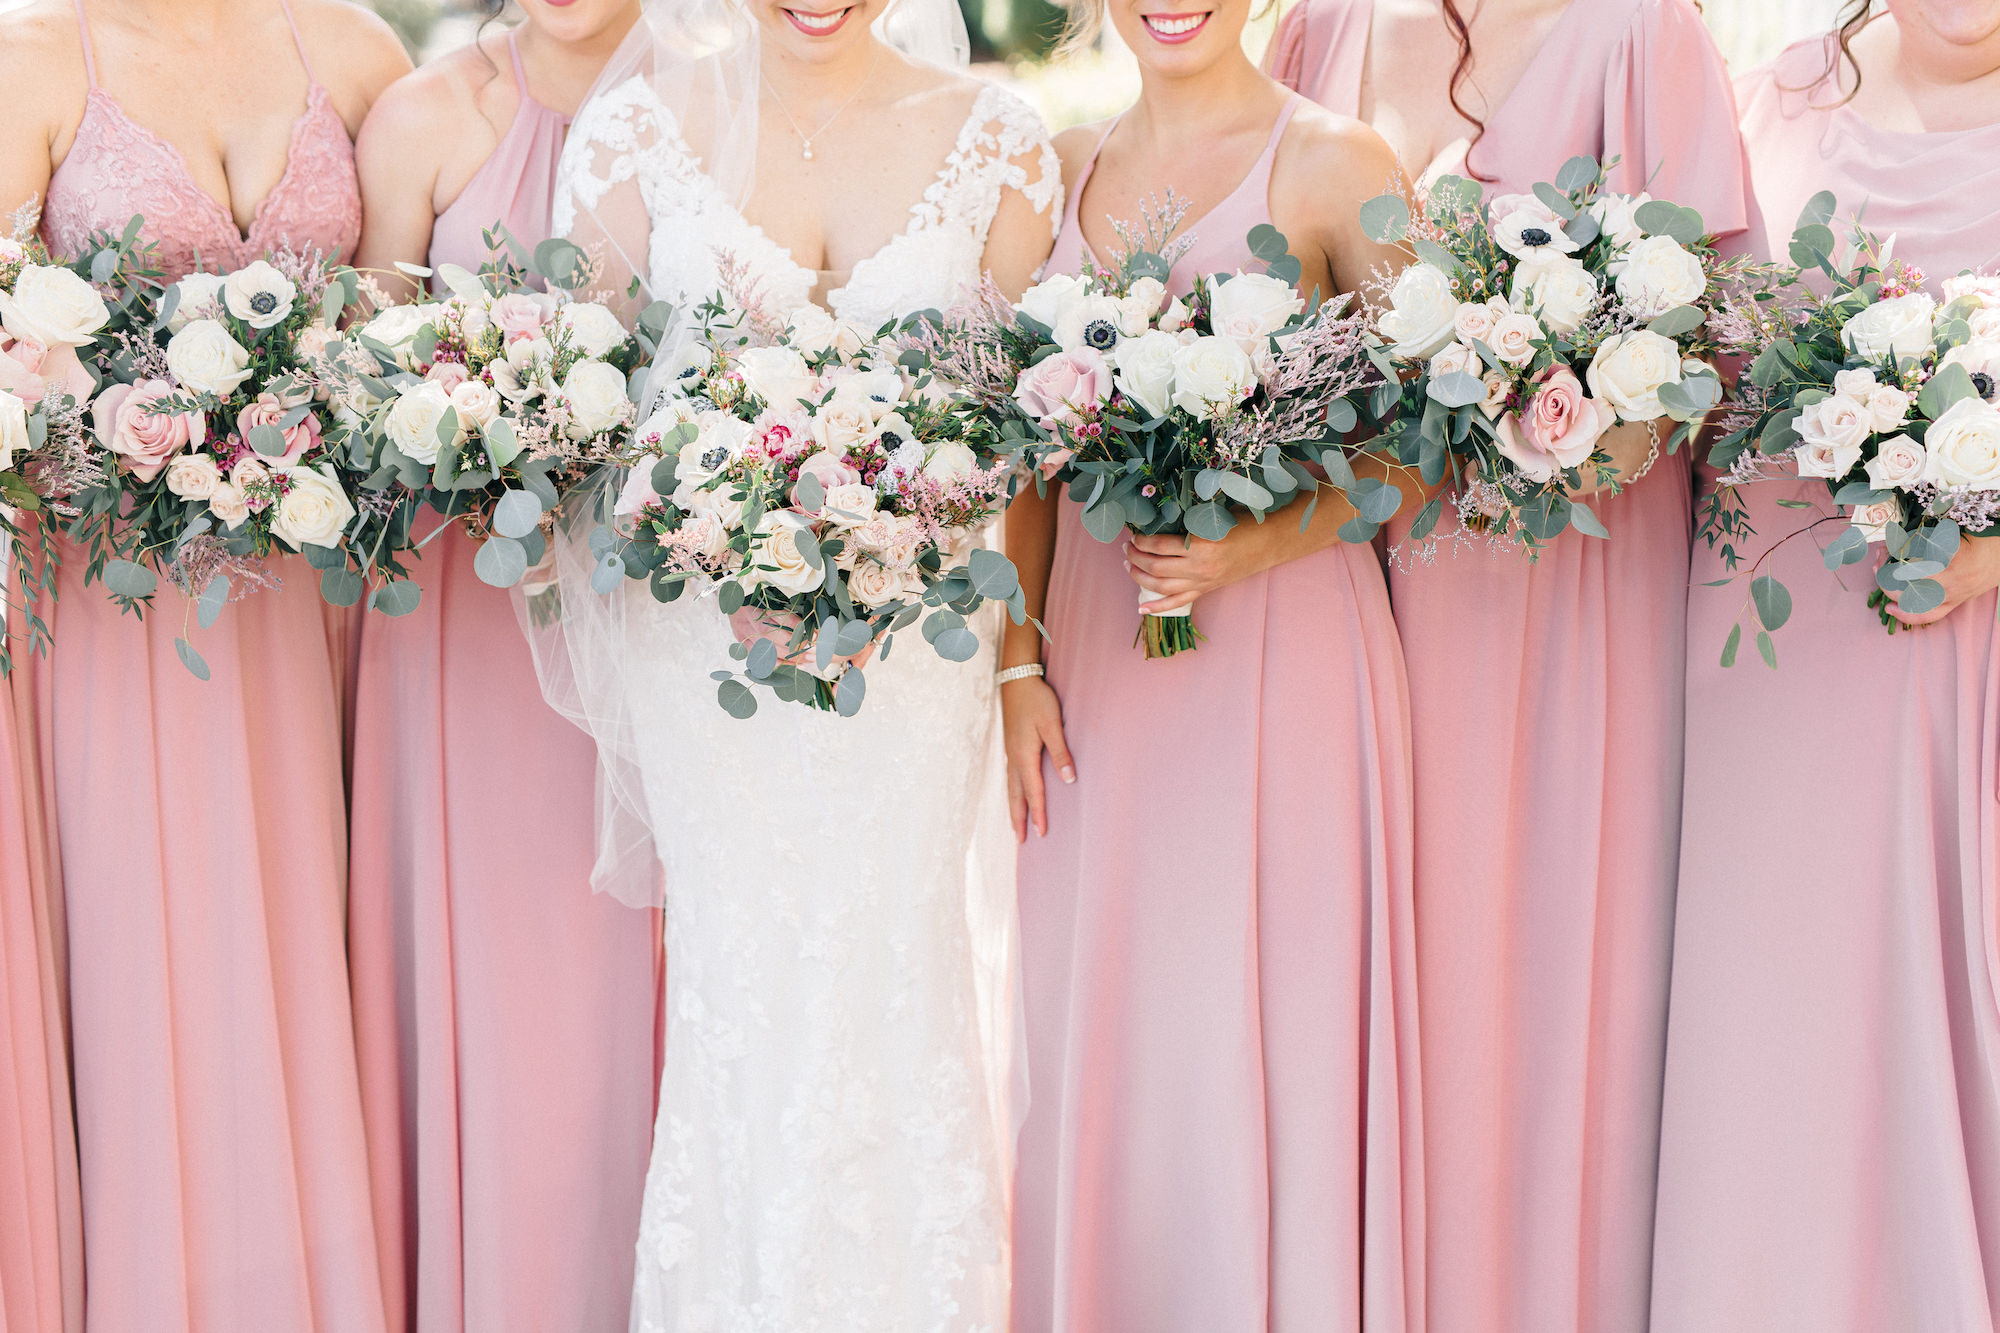 Bride and Bridesmaids in Dusty Pink Floor Length Bridesmaids Dresses with White and Blush Bouquets Inspiration